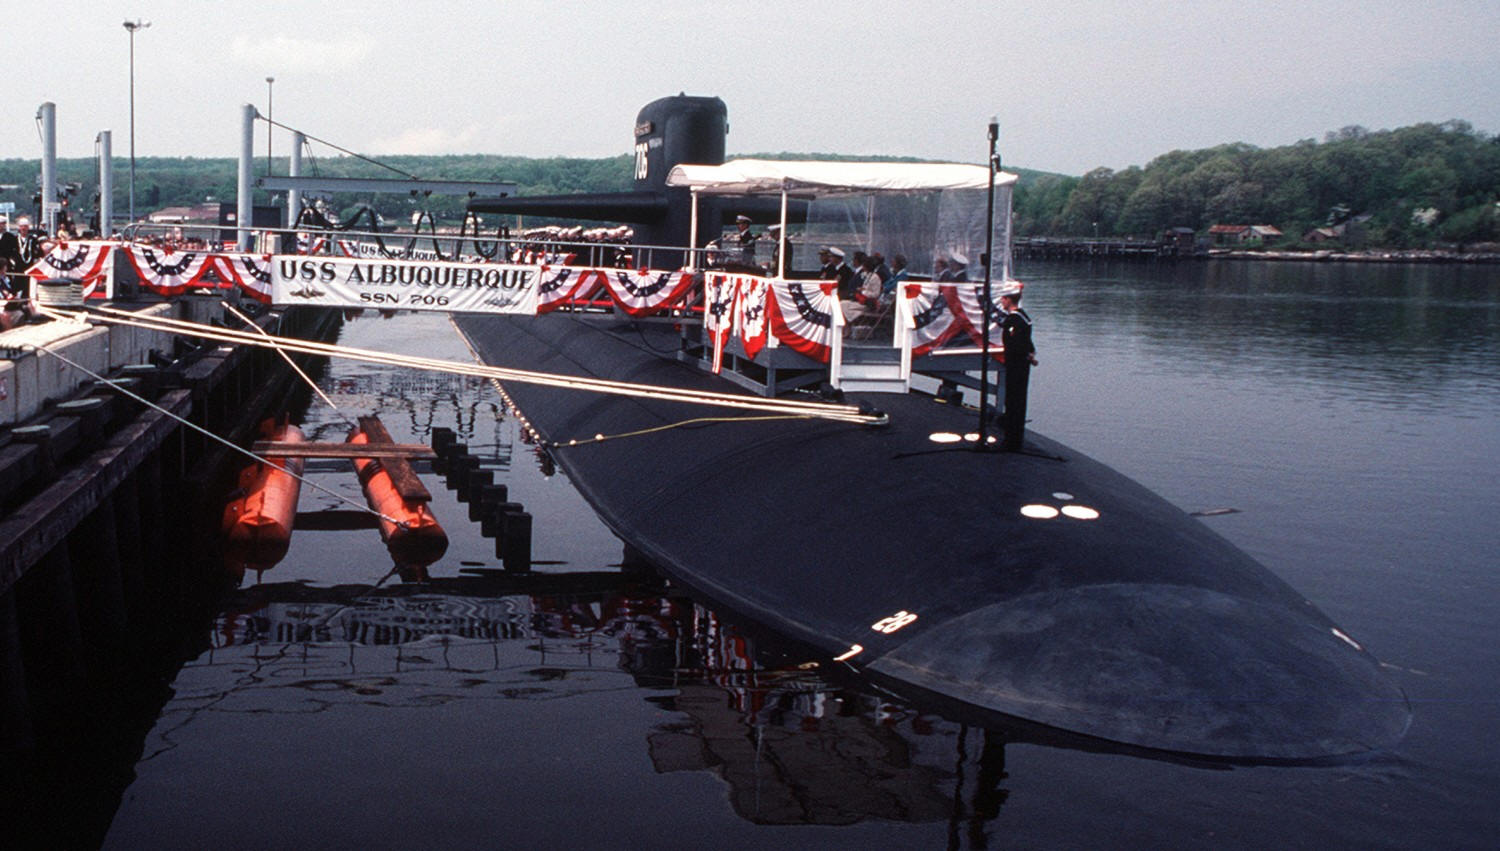 ssn-706 uss albuquerque commissioning ceremony may 1983